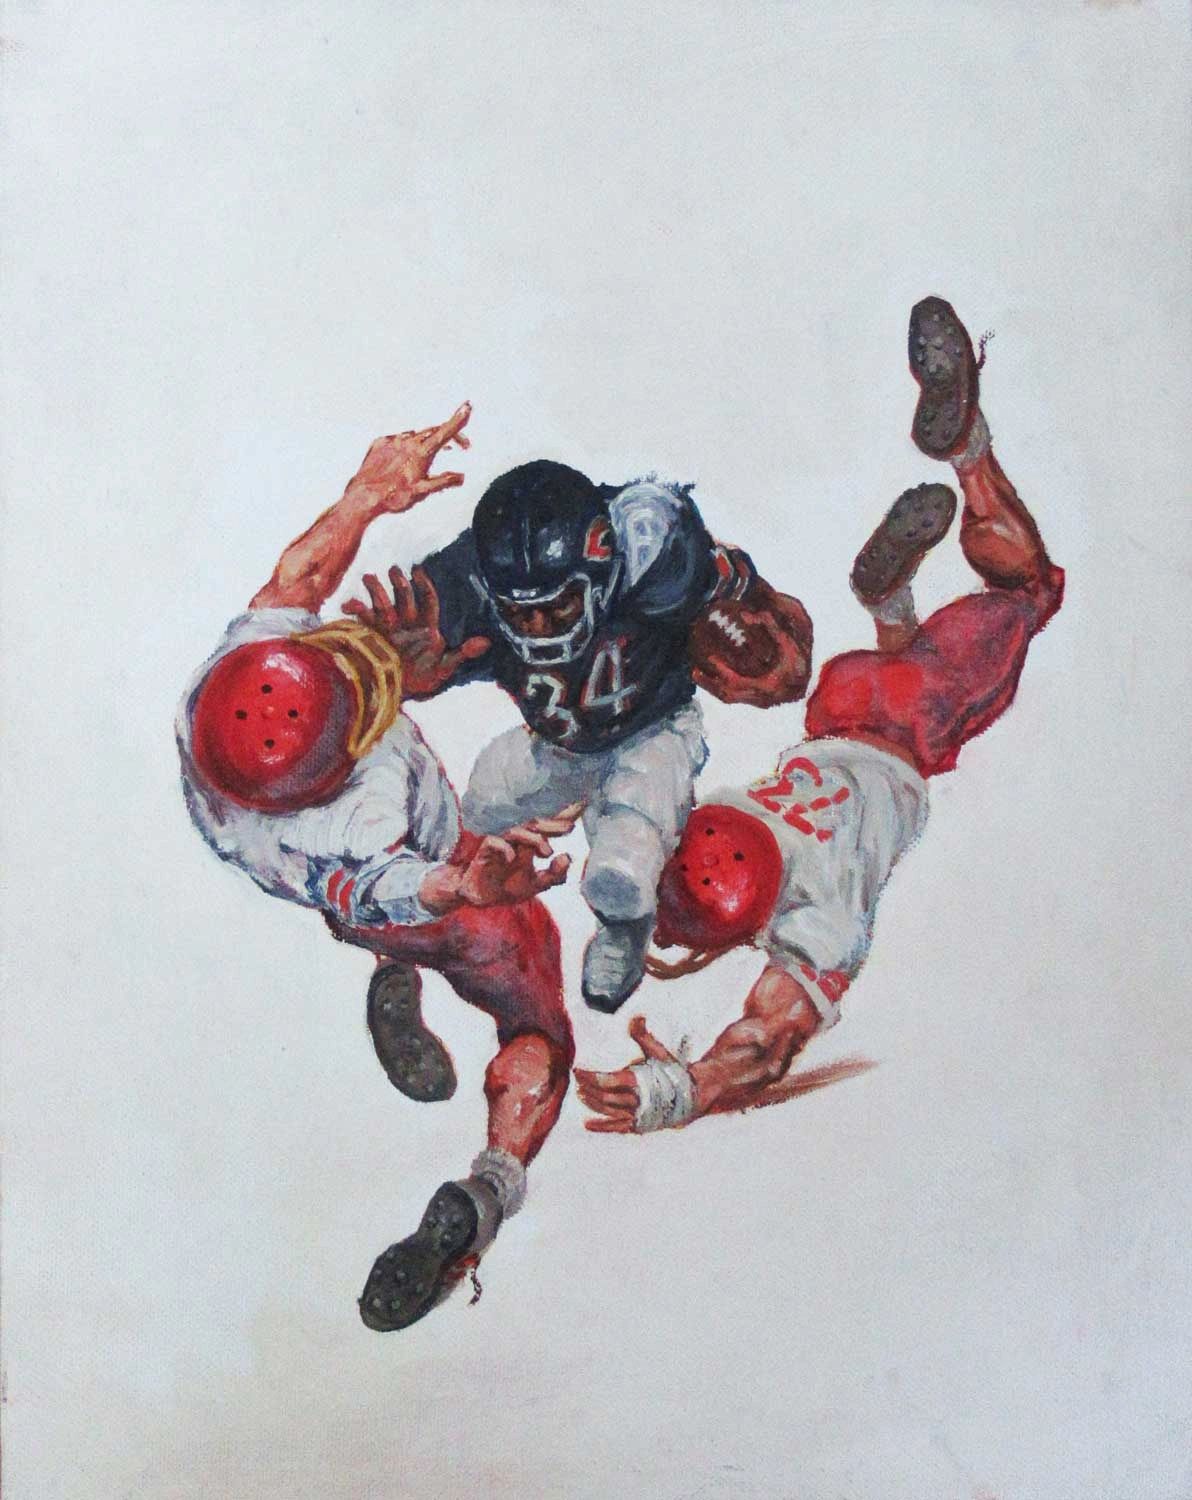 Football player breaking tackles as he applies a straight arm.